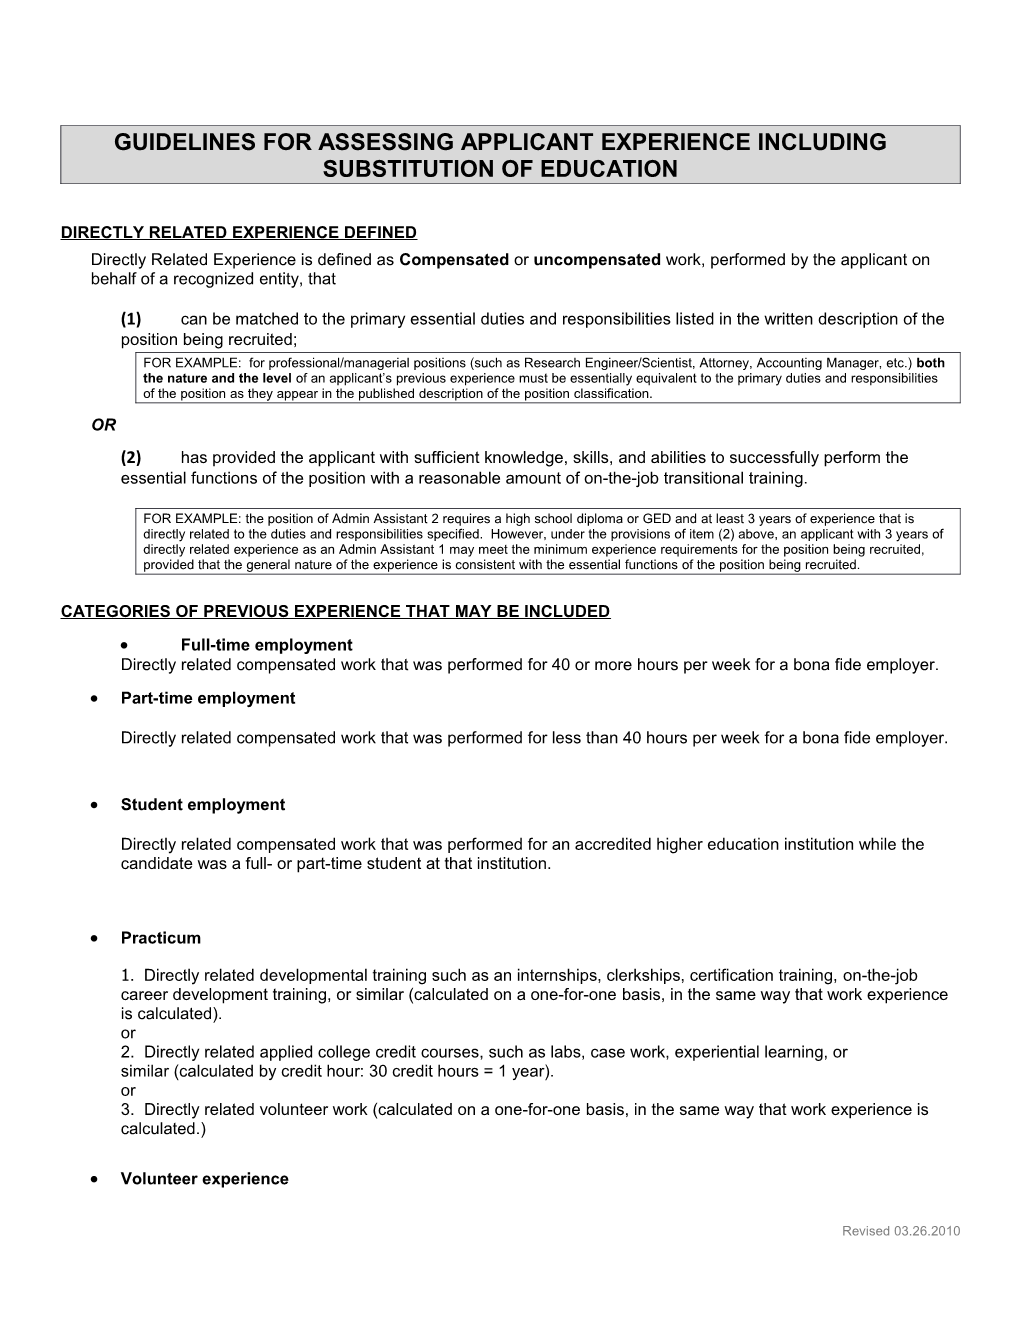 Guidelines for Assessing Applicant Experience Including Substitution of Education